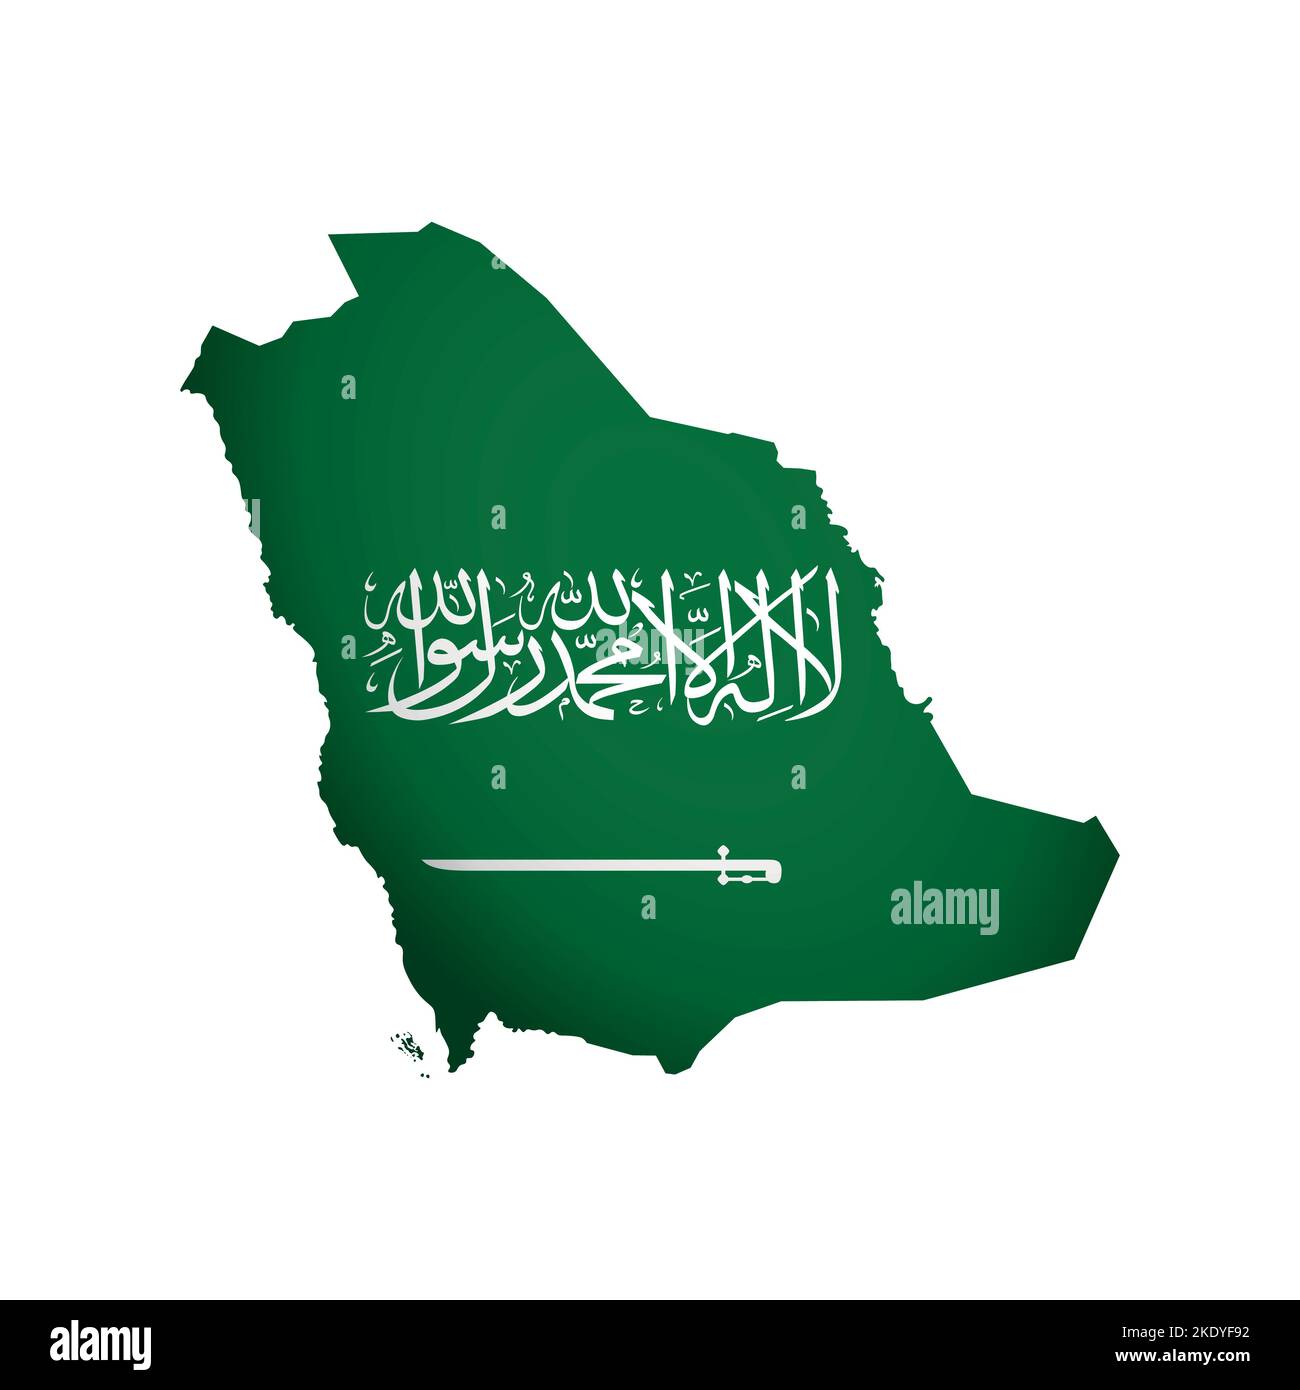 Vector isolated illustration. Official ensign of Saudi Arabia. Flag on national map with Arabic text shahada on green background. Creative design Stock Vector